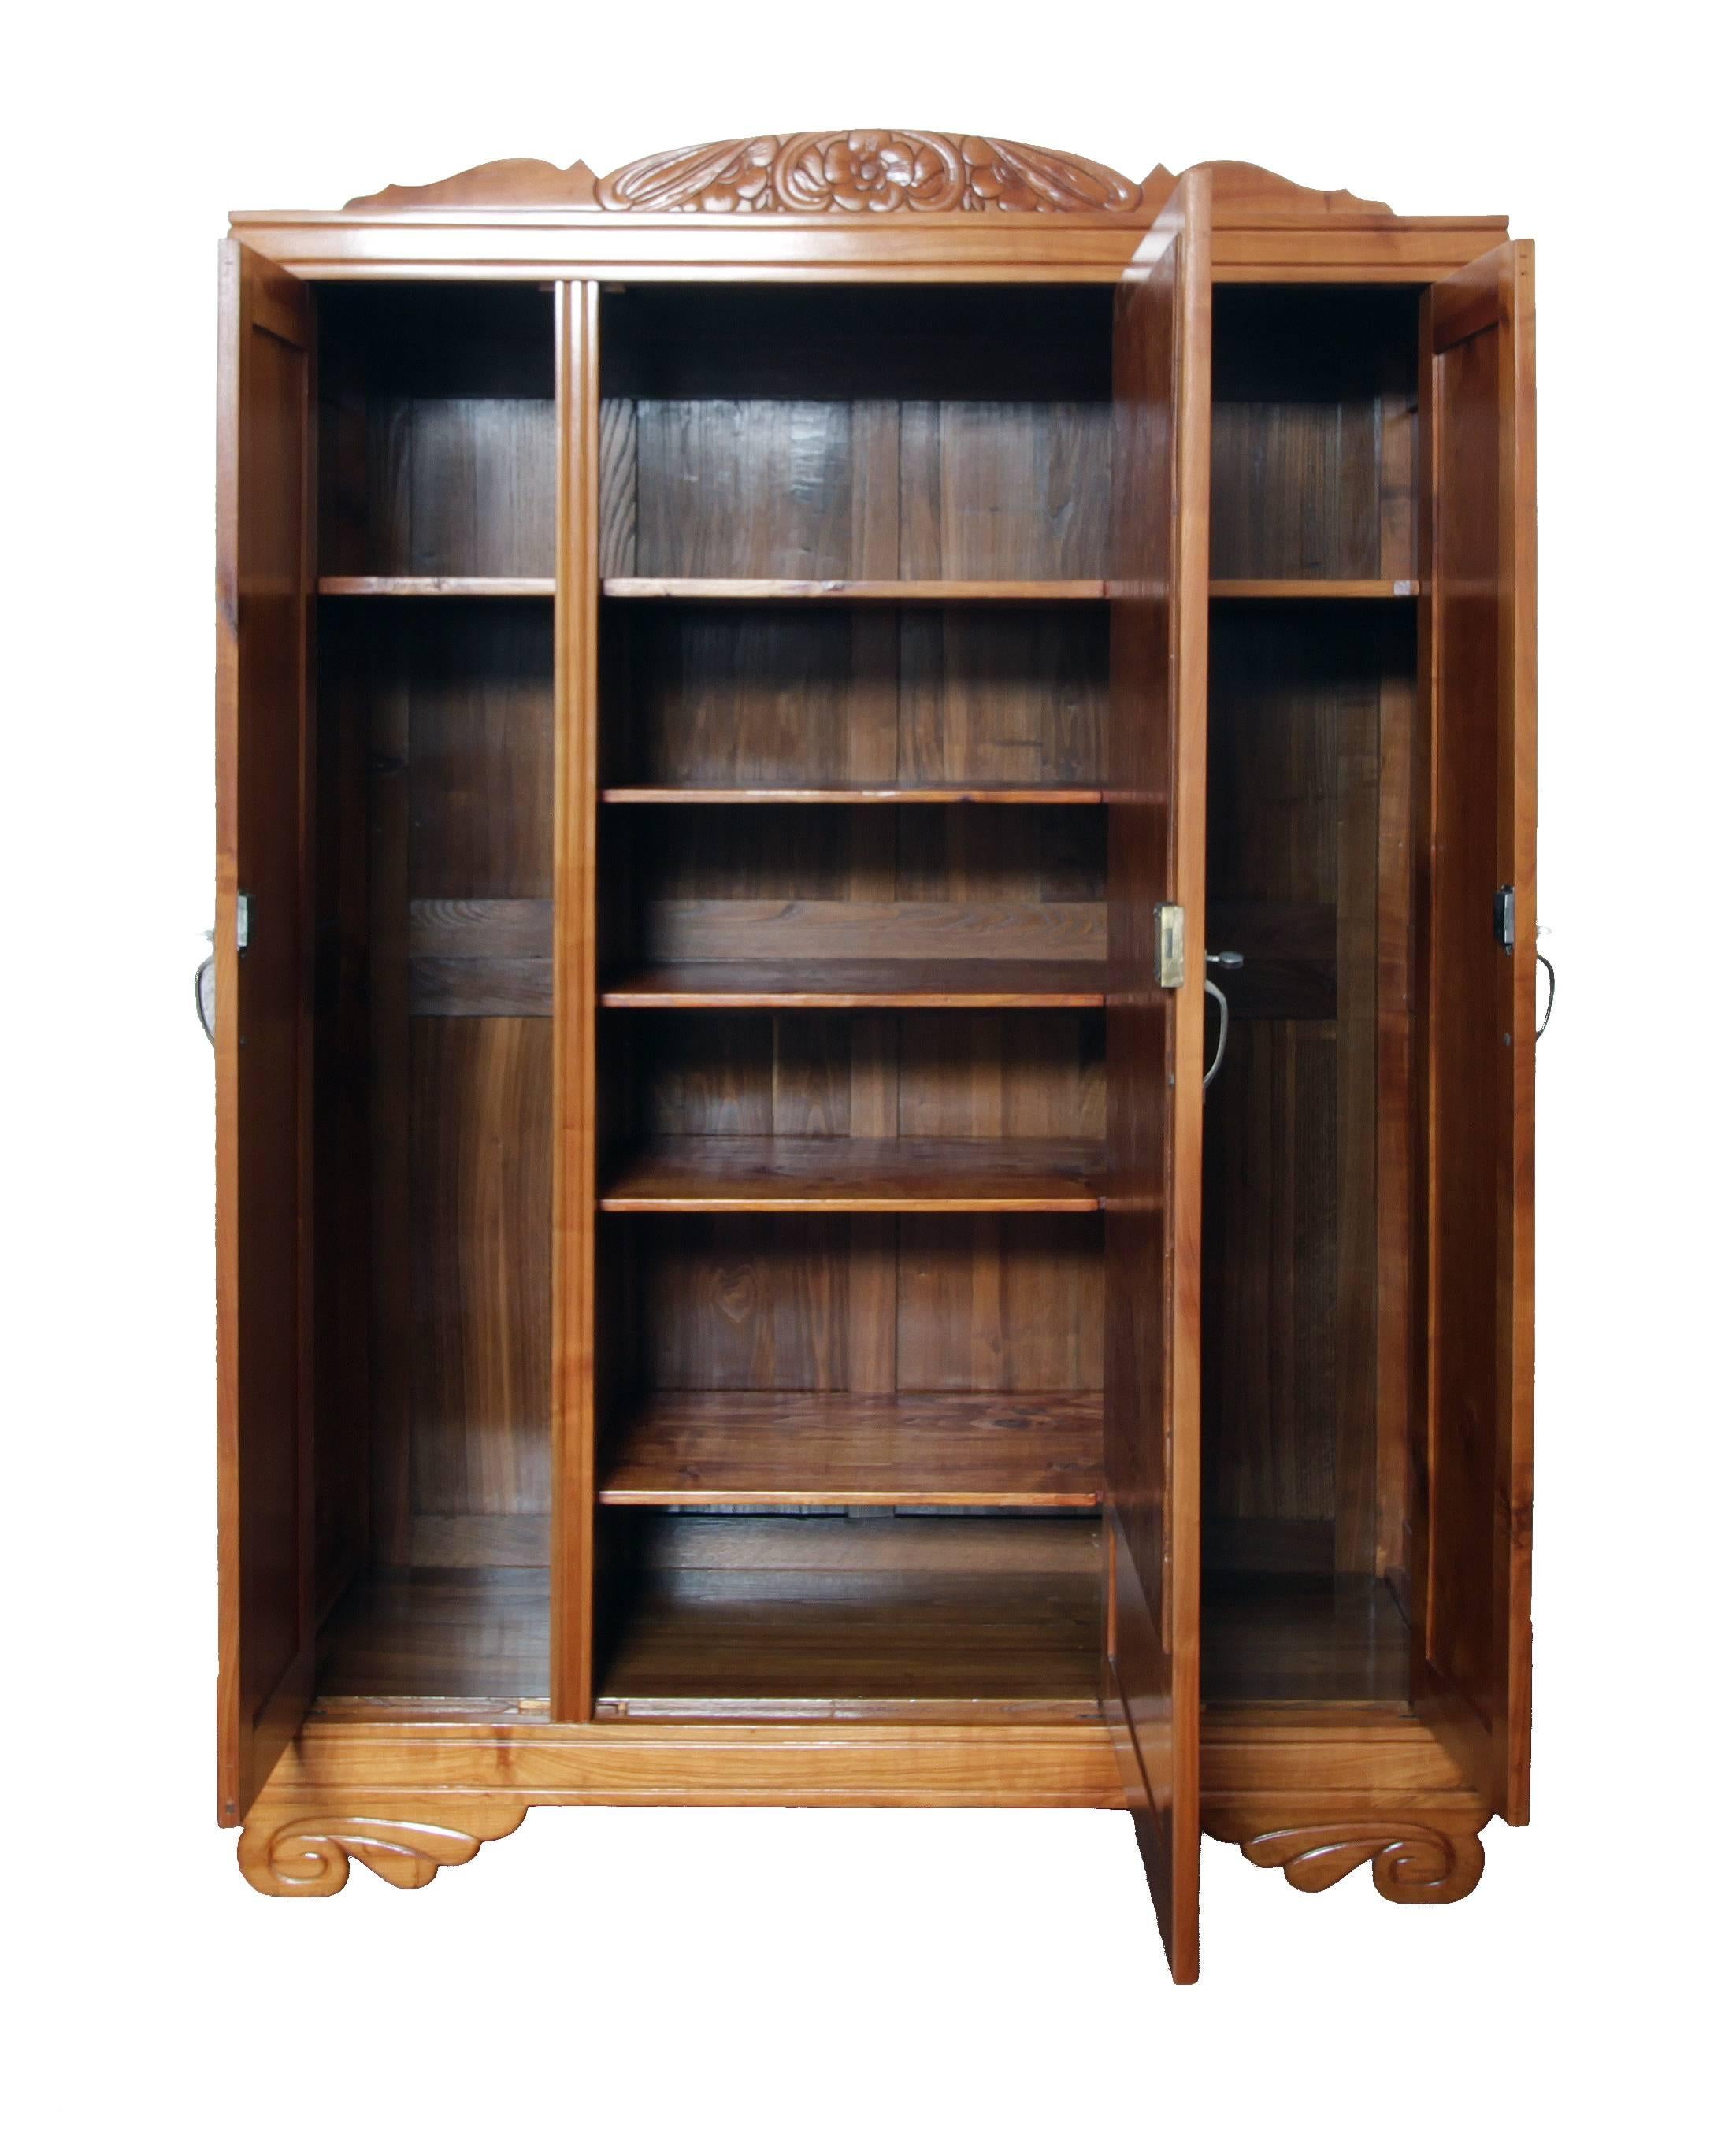 The Art Deco cabinet from circa 1920 from Germany was made in solid cherrywood.
The cabinet can be disassembled and shipped disassembled. The cabinet consists of:
Lower part, upper part, three doors, two side parts, the rear wall and several